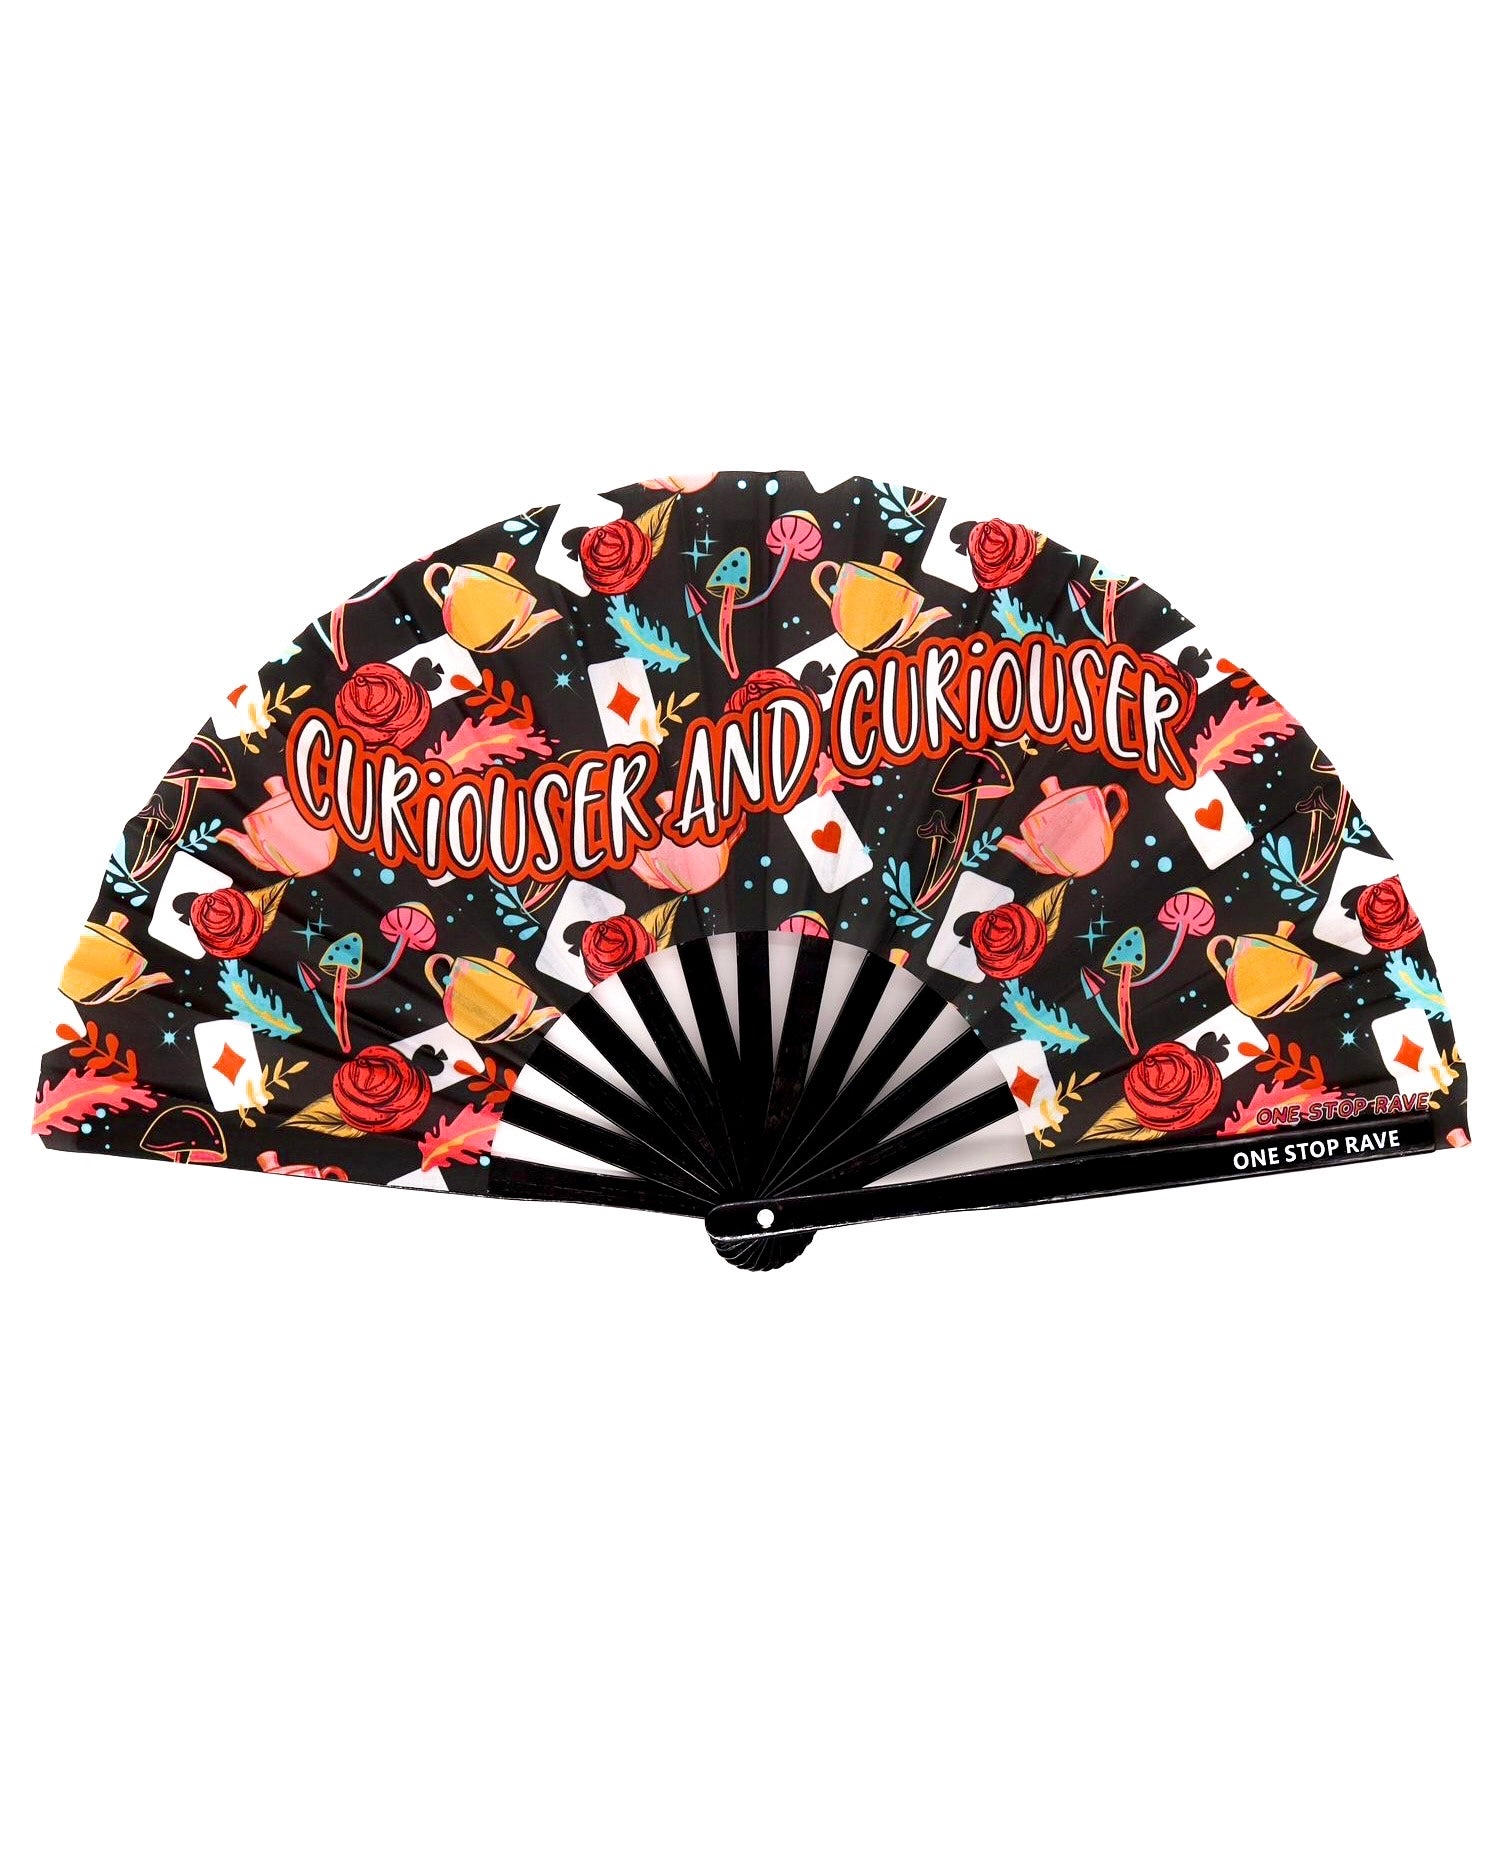 Curiouser and Curiouser Hand Fan, Festival Fans 13.5", - One Stop Rave